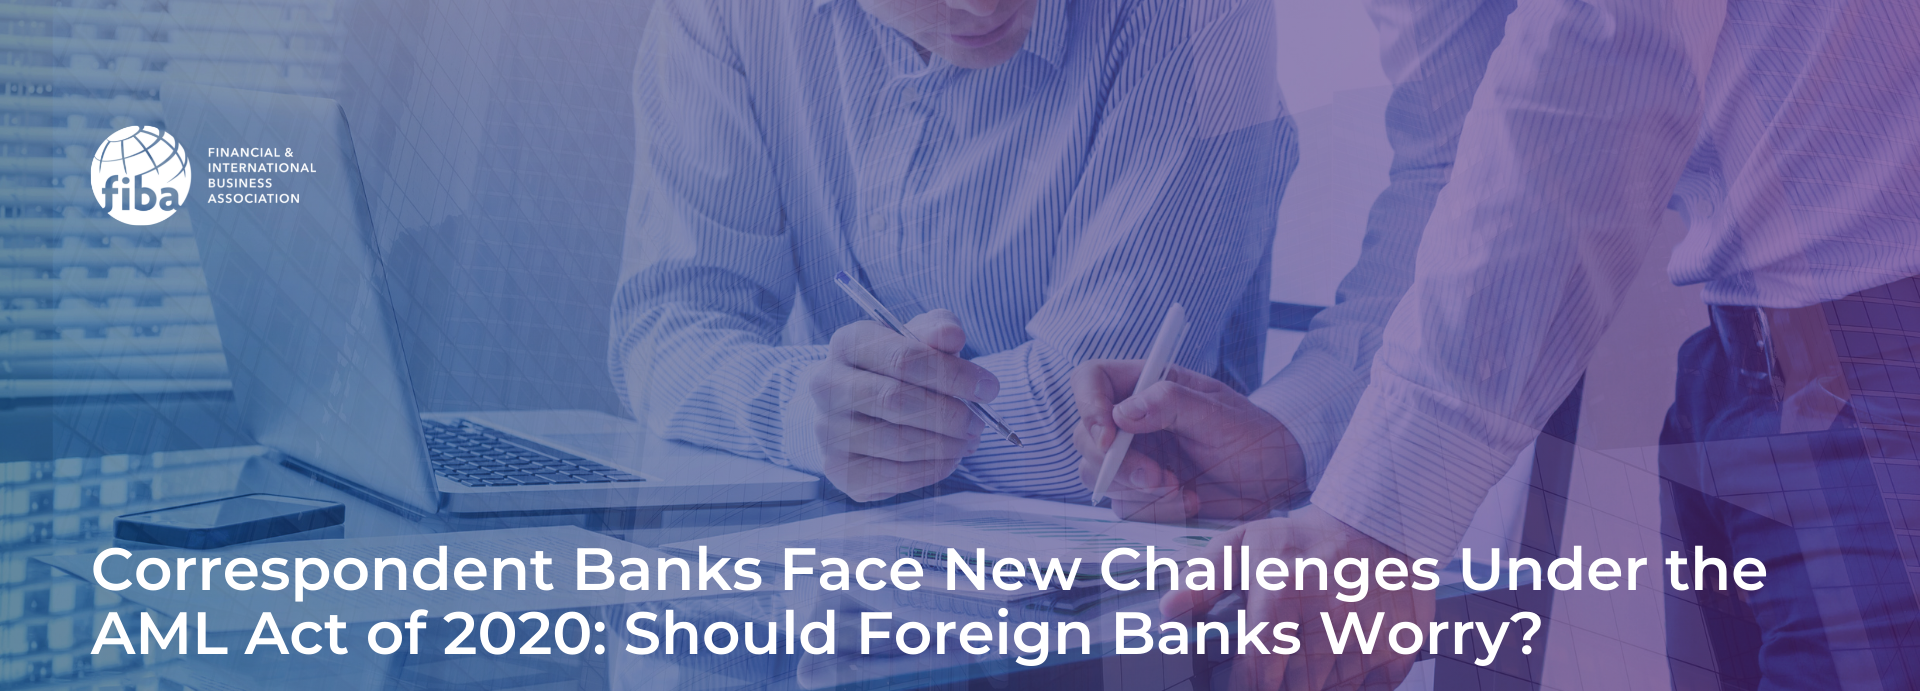 Correspondent Banks Face New Challenges Under the AML Act of 2020: Should Foreign Banks Worry?